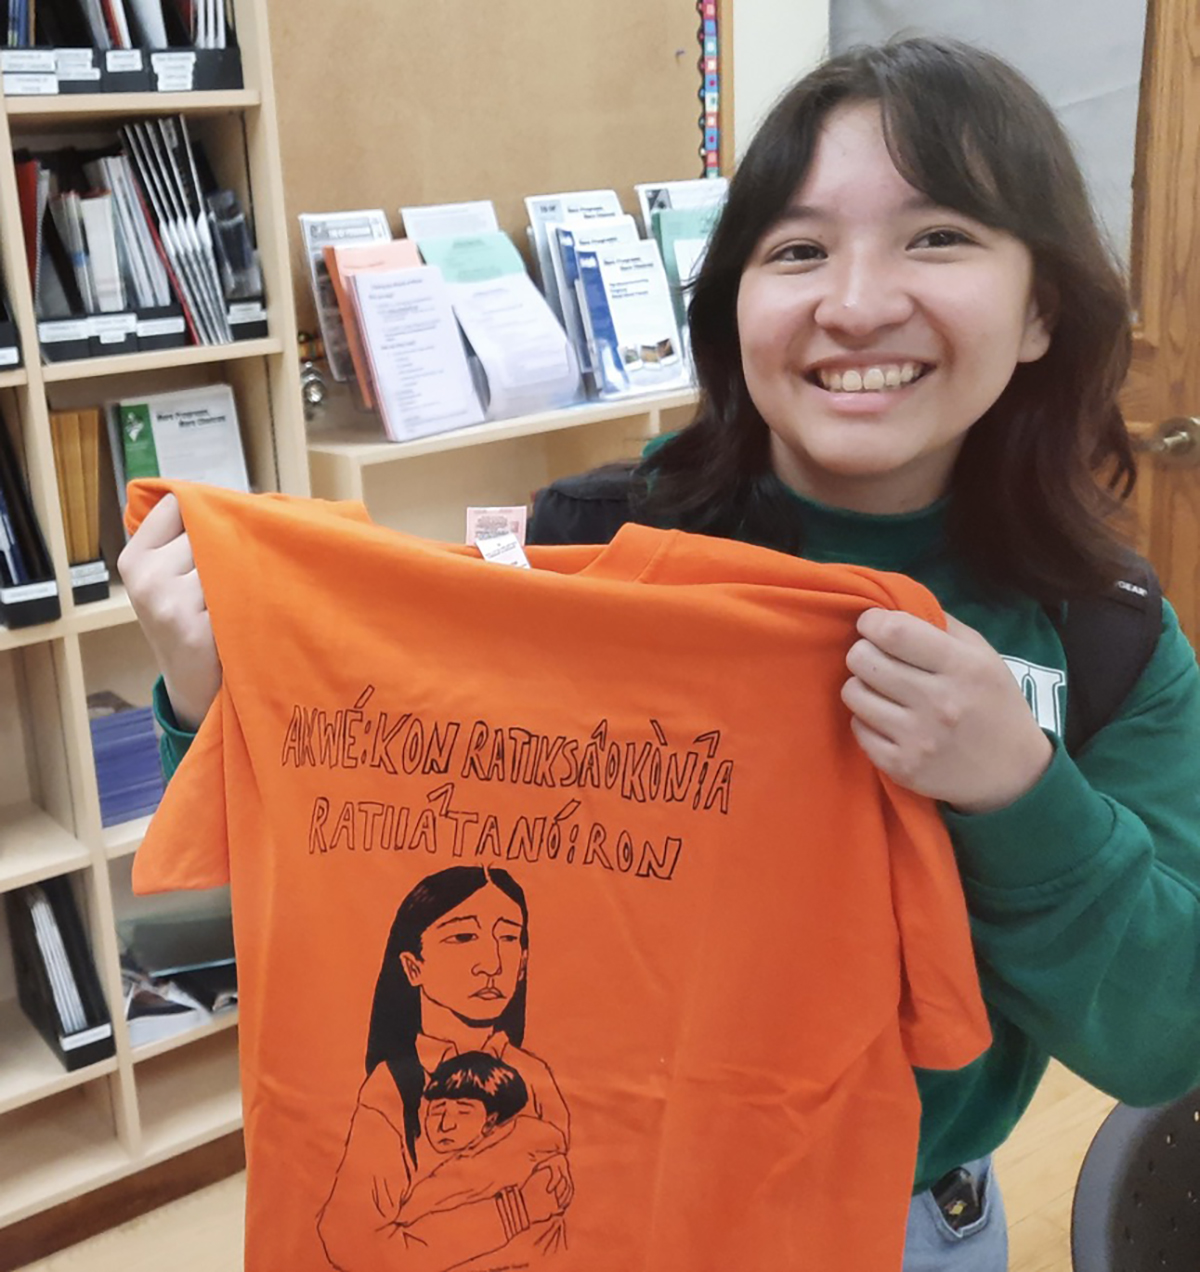 A smiling woman holds an orange T-shirt with words written in the Mohawk language.